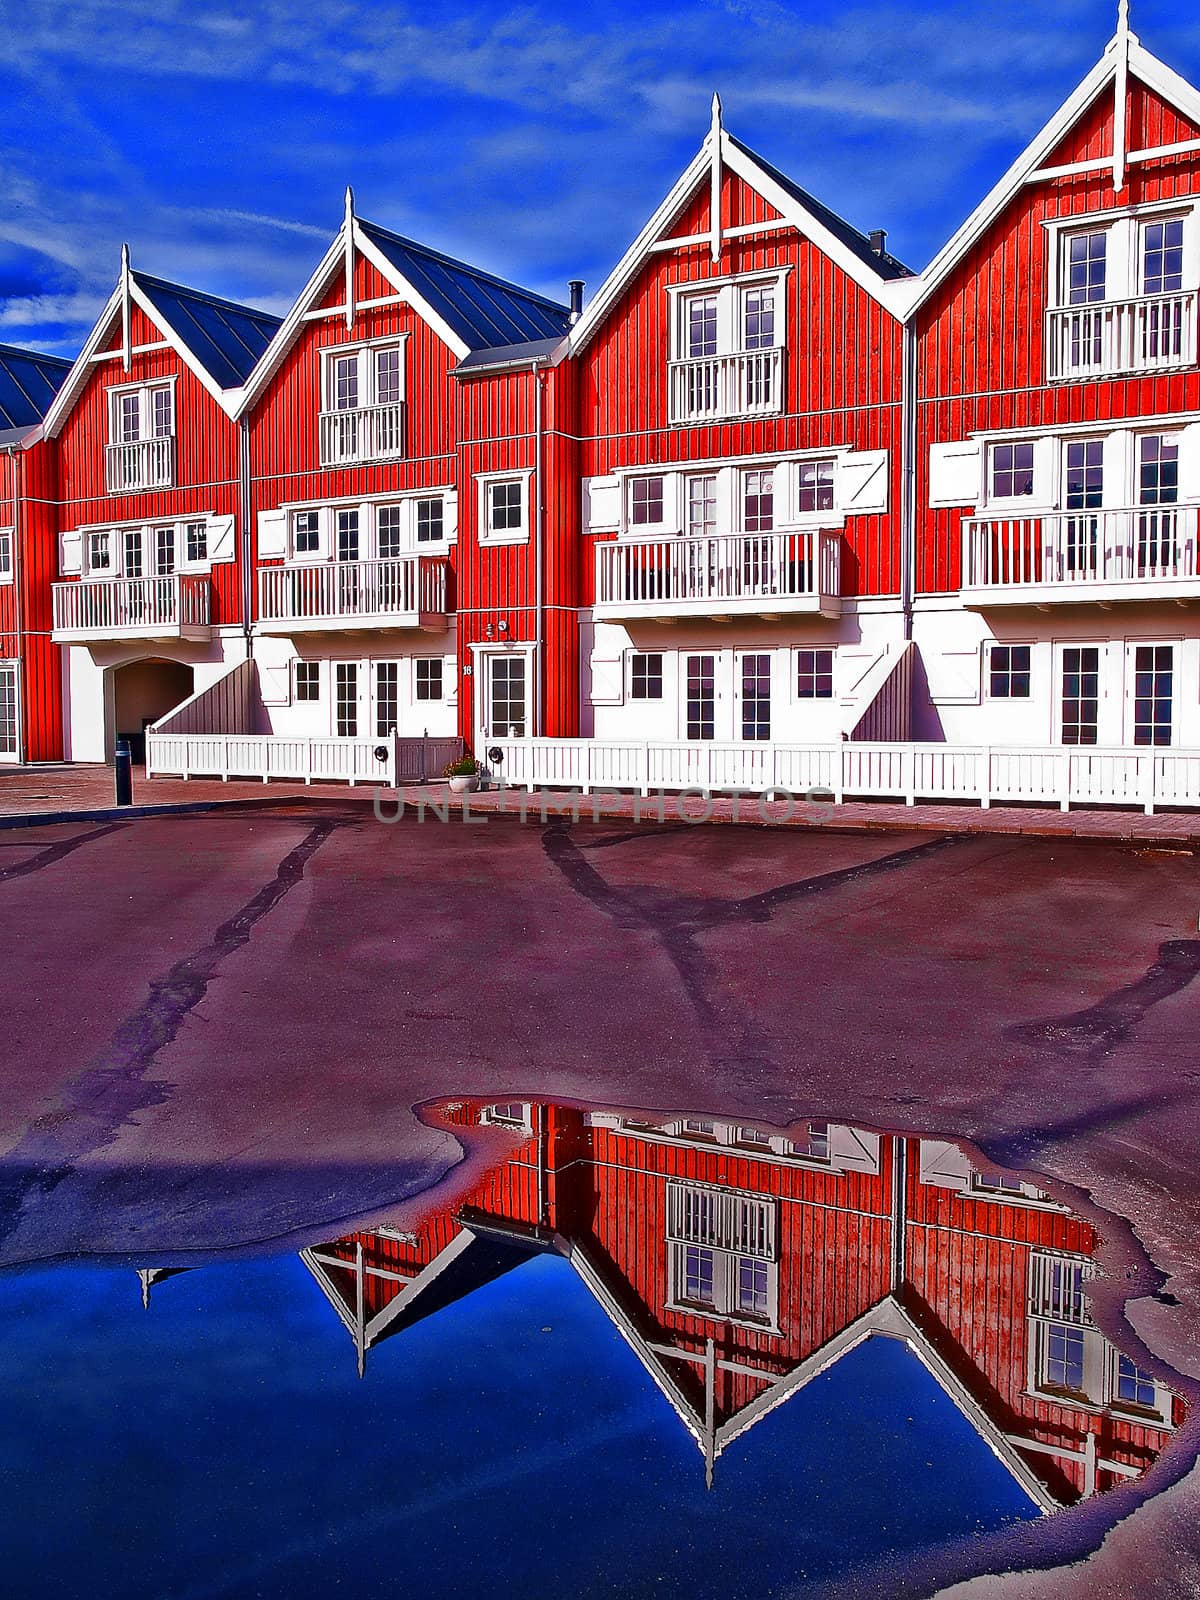 Modern classical design beach summer houses reflected perfectly in a small water pond digital art manipulation